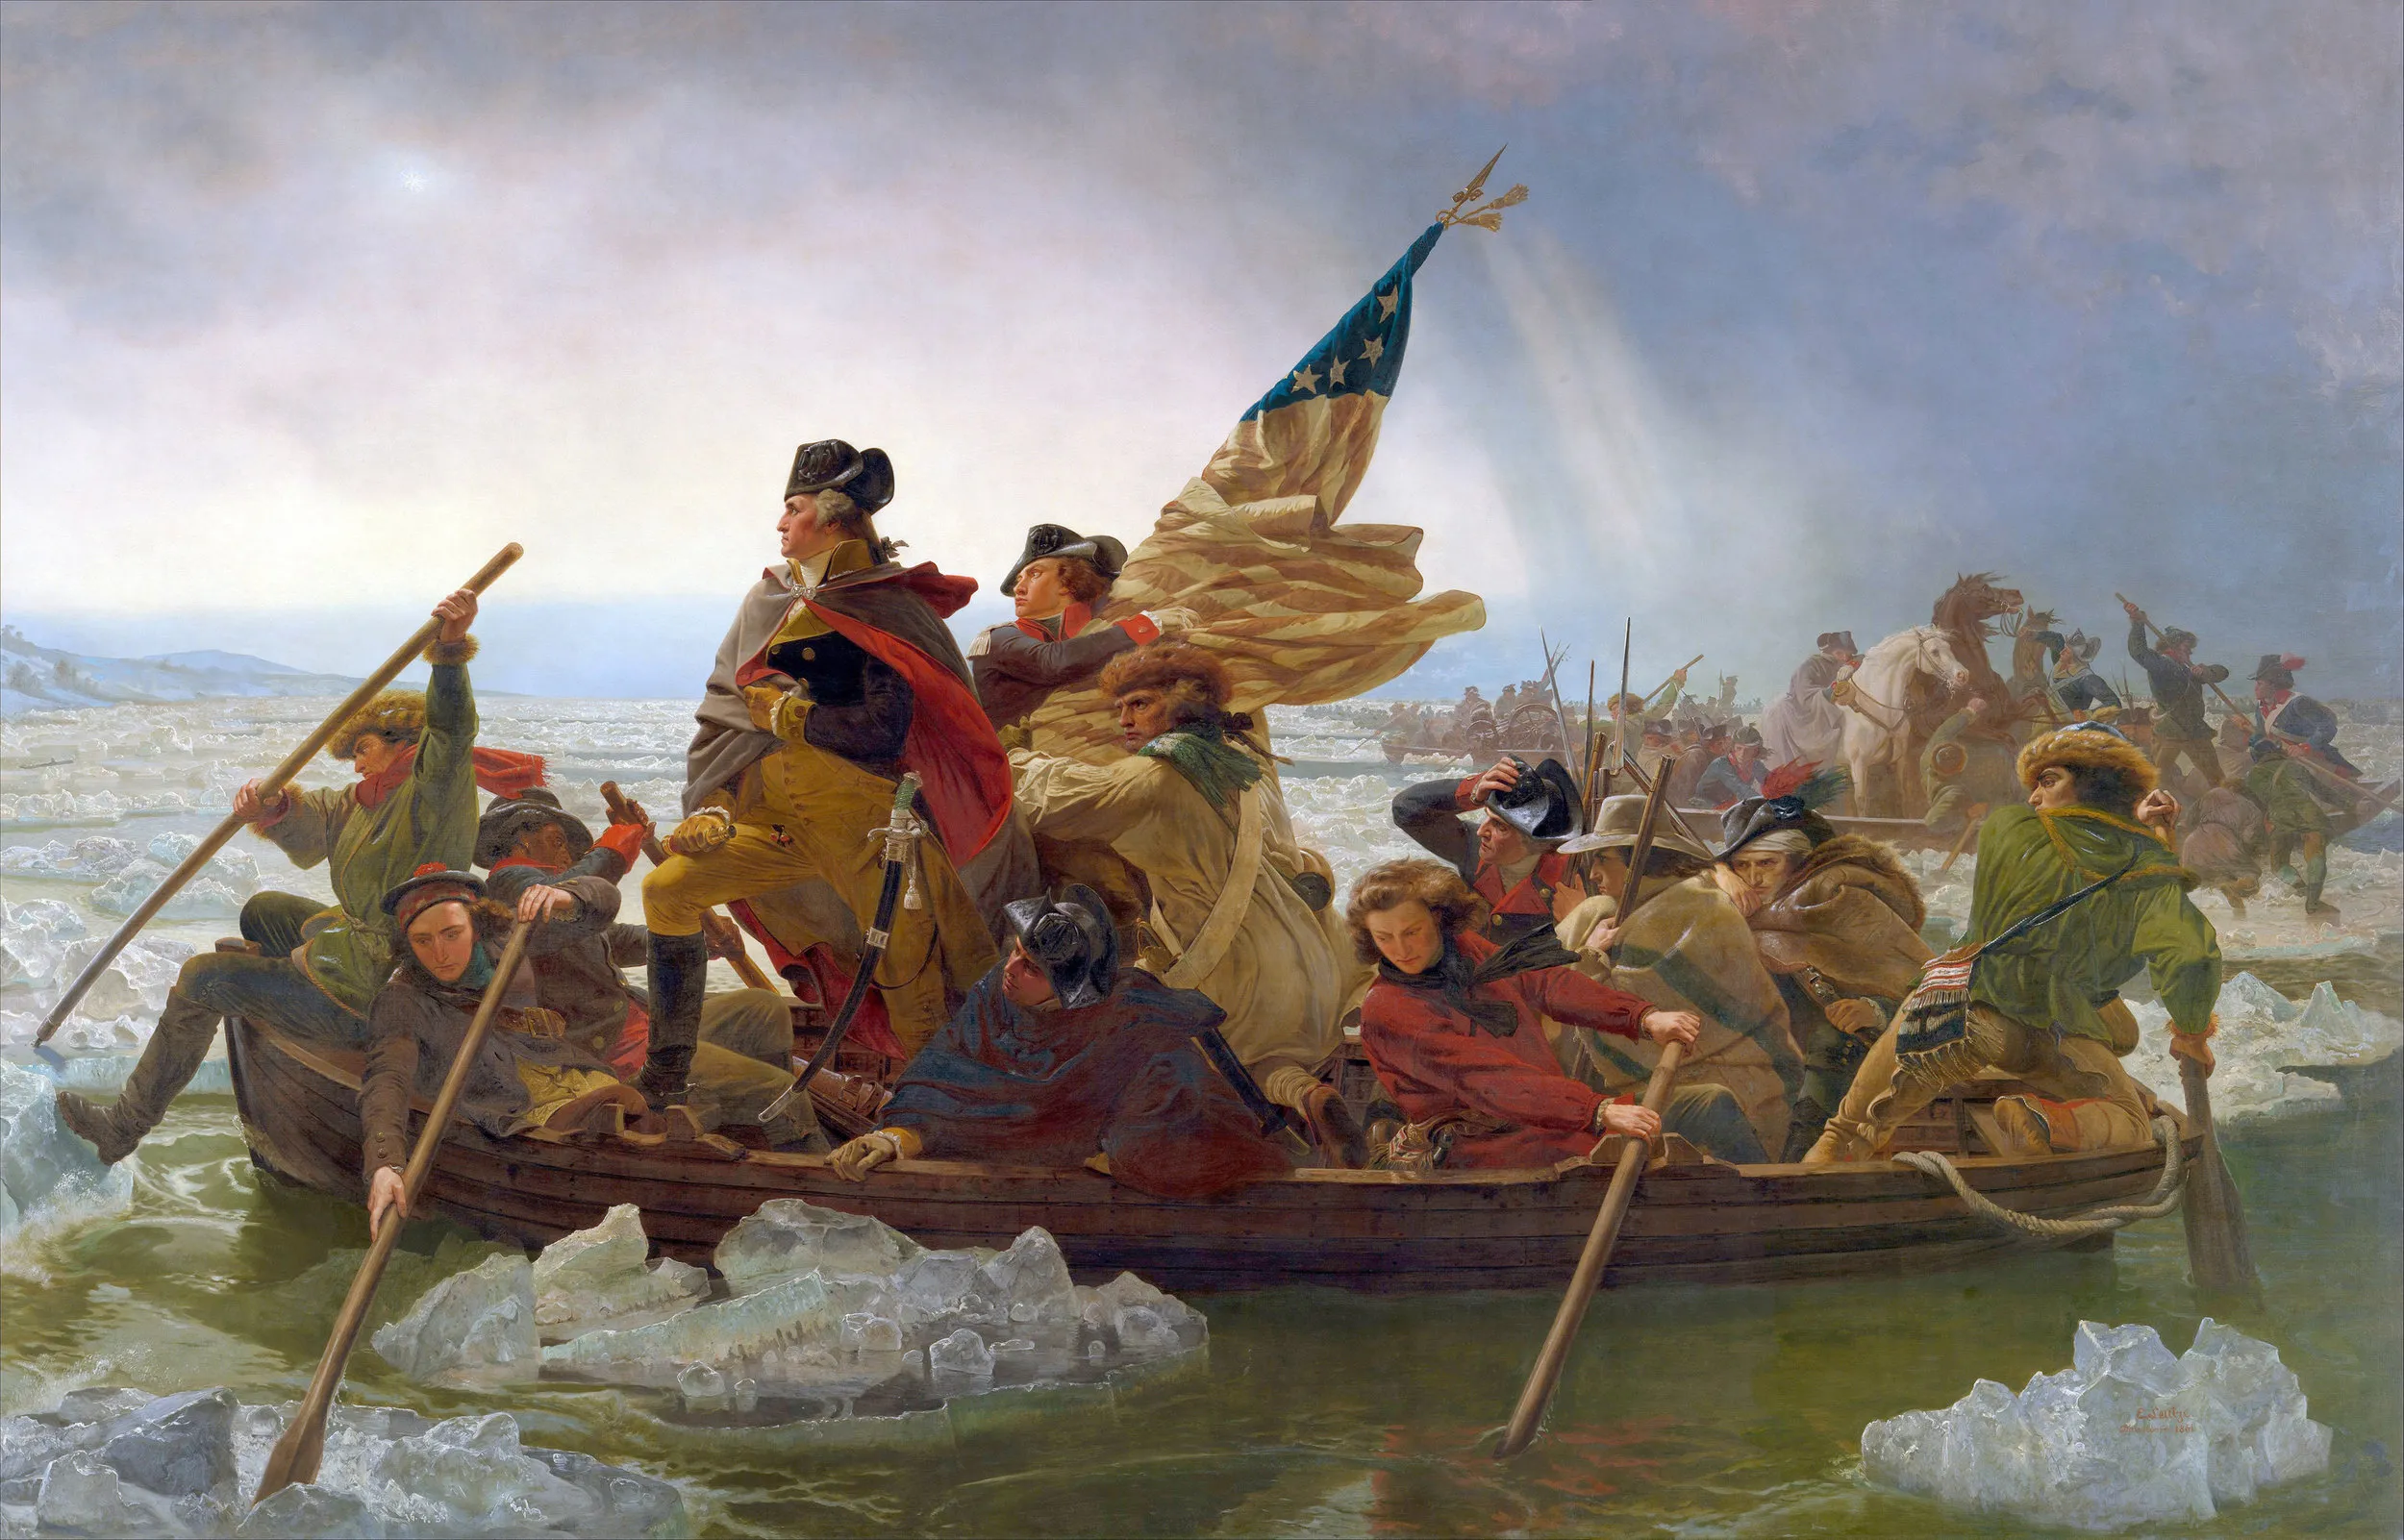 The famous Leutze painting of George Washington crossing the Delaware River.